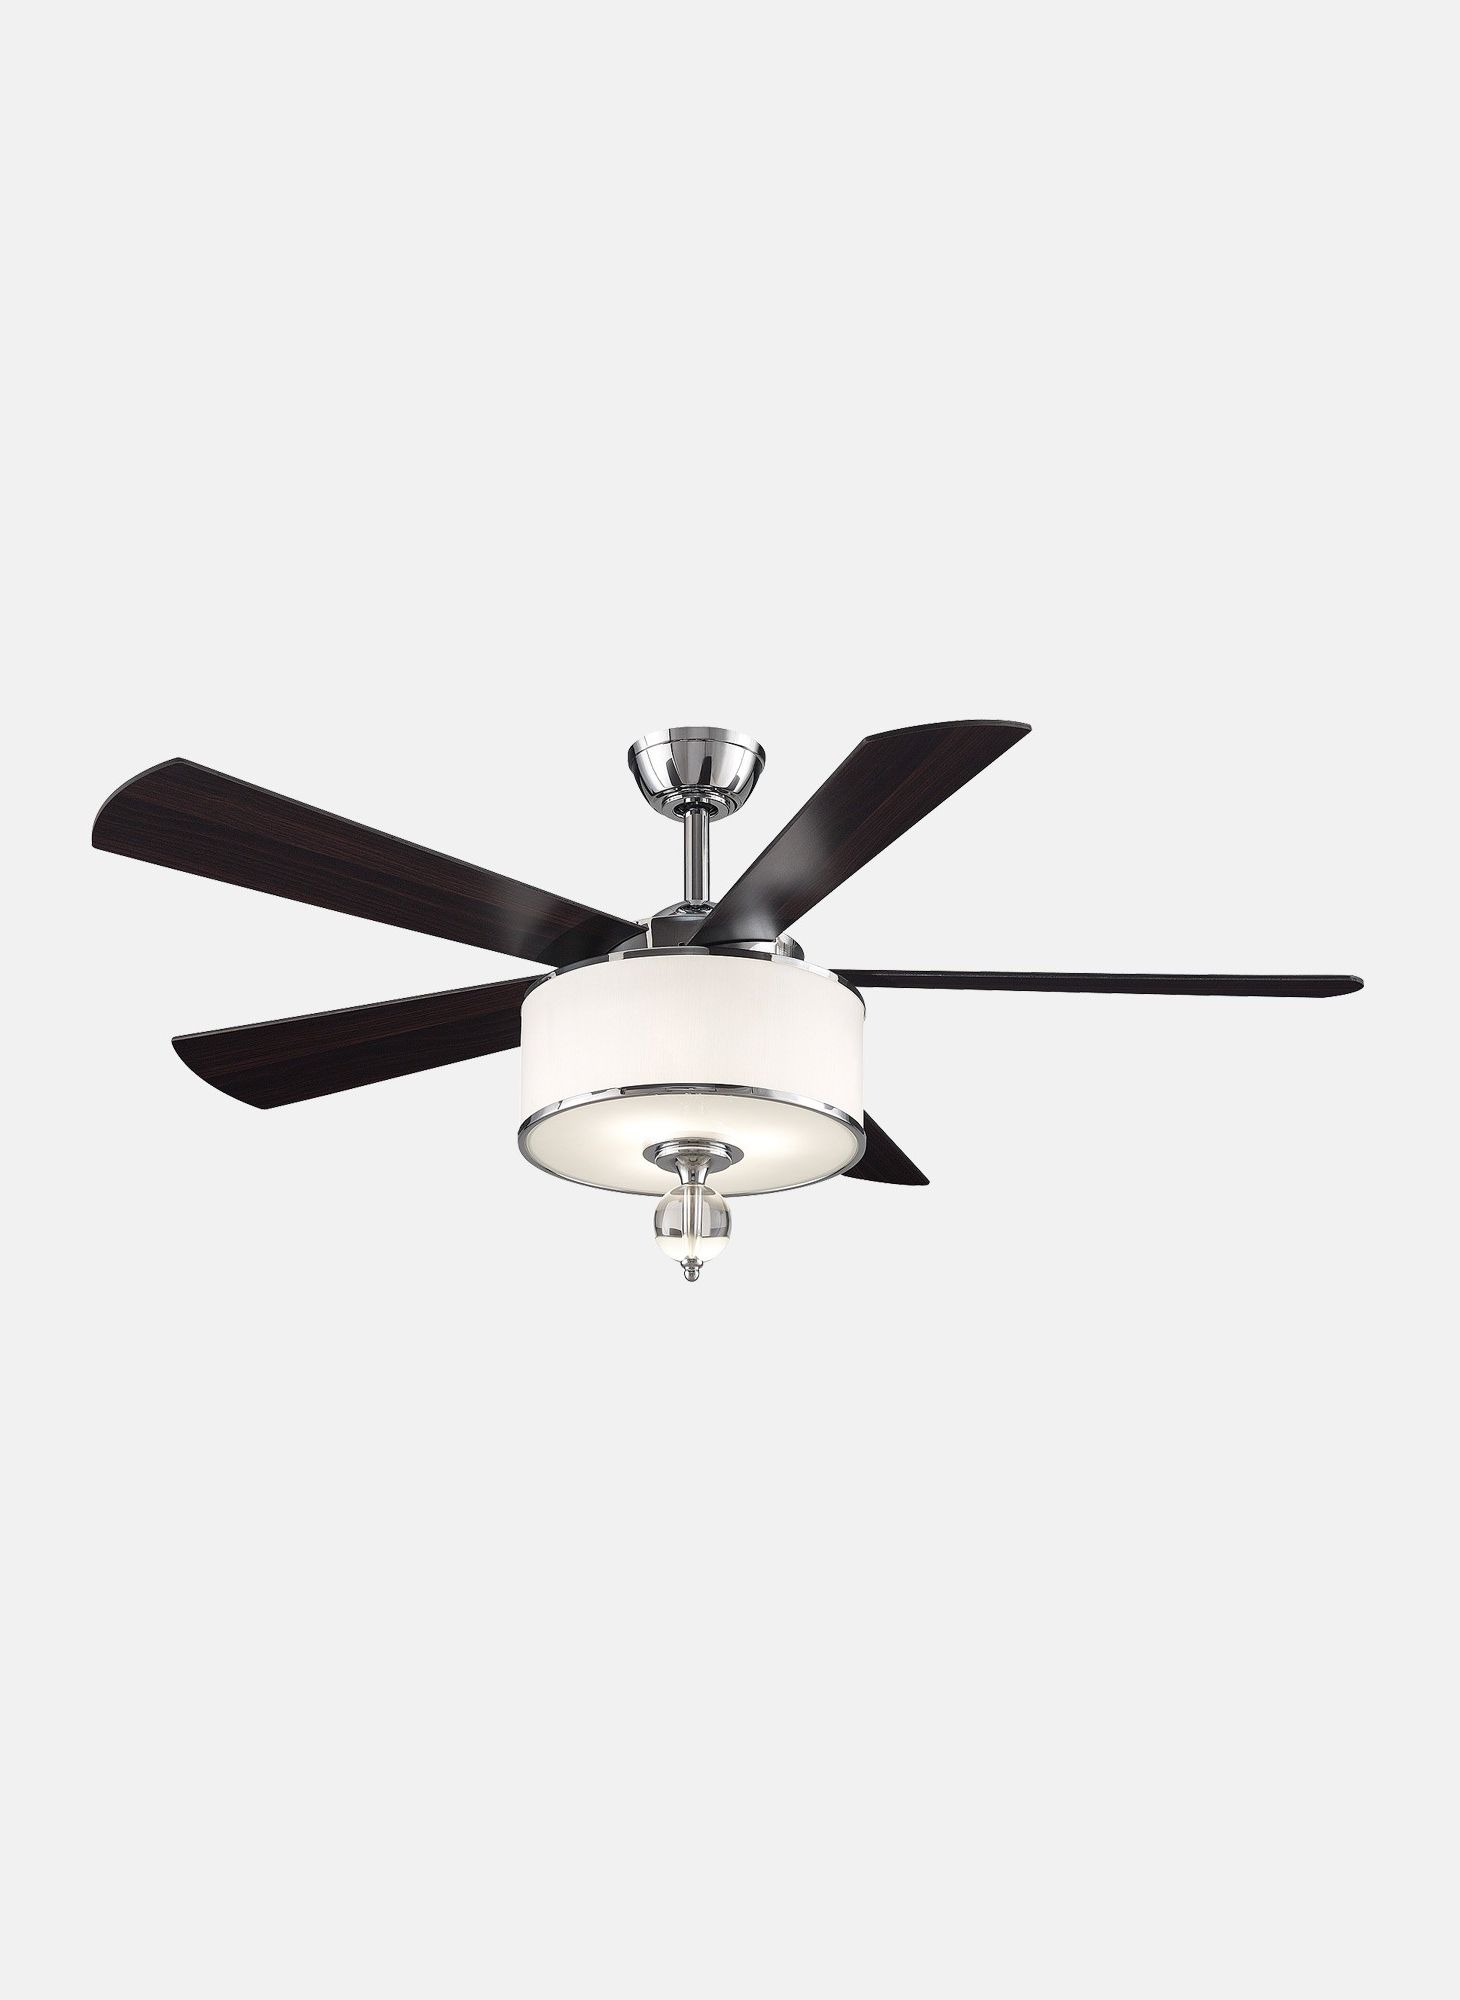 Victorian Style Outdoor Ceiling Fans Regarding Current Victoria Harbor – Fans (View 12 of 20)